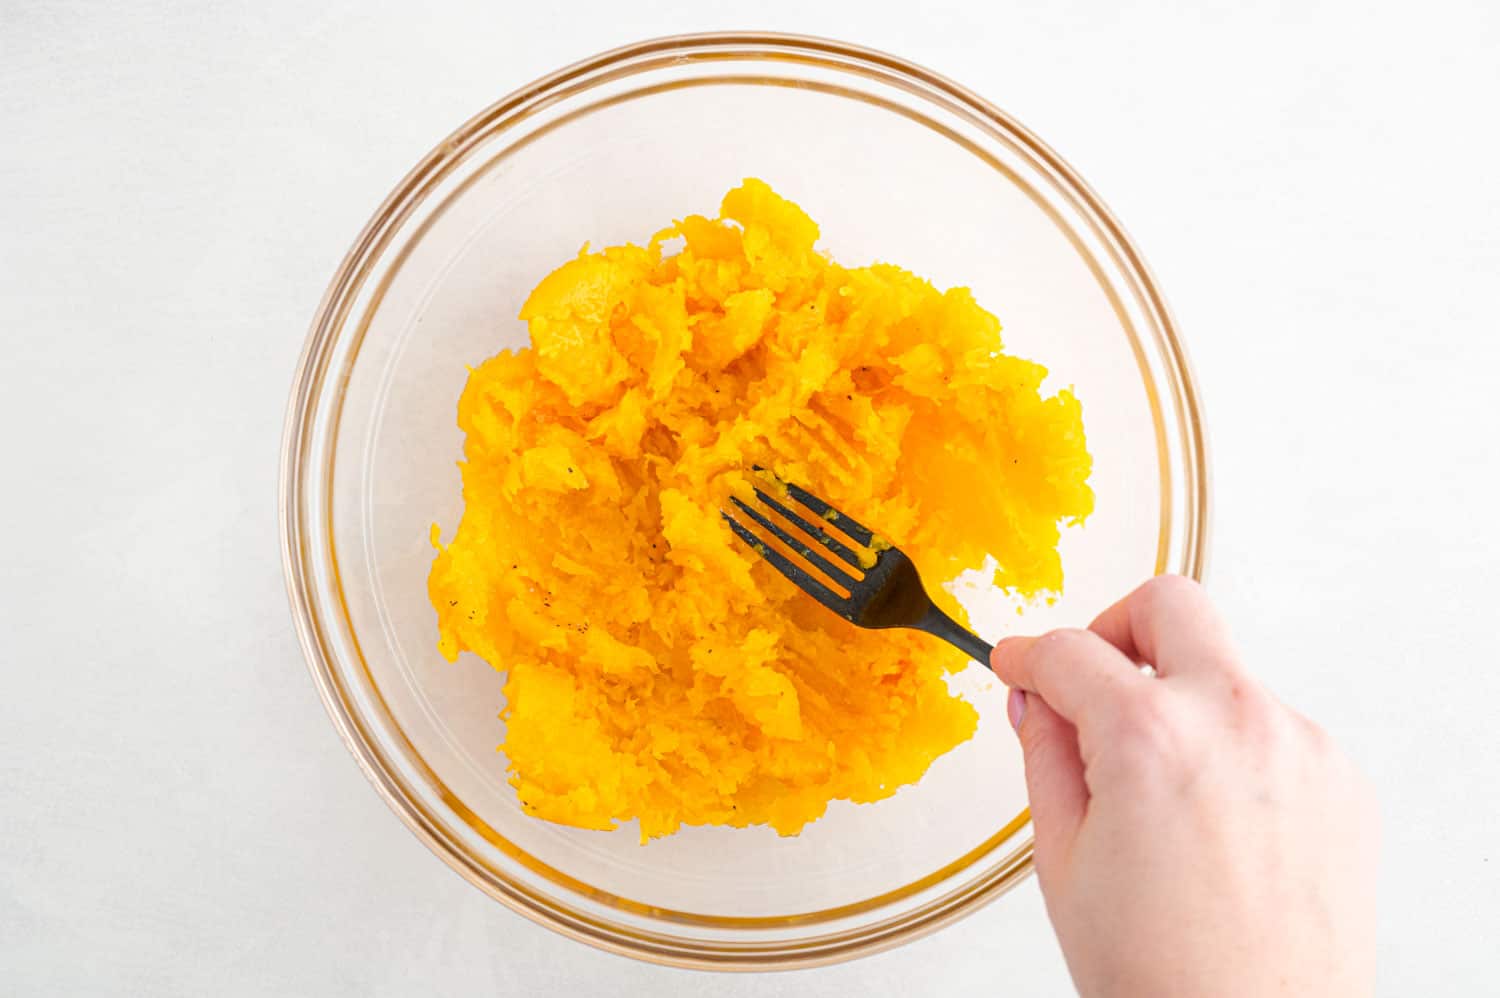 Squash flesh being mashed with a fork in clear bowl.